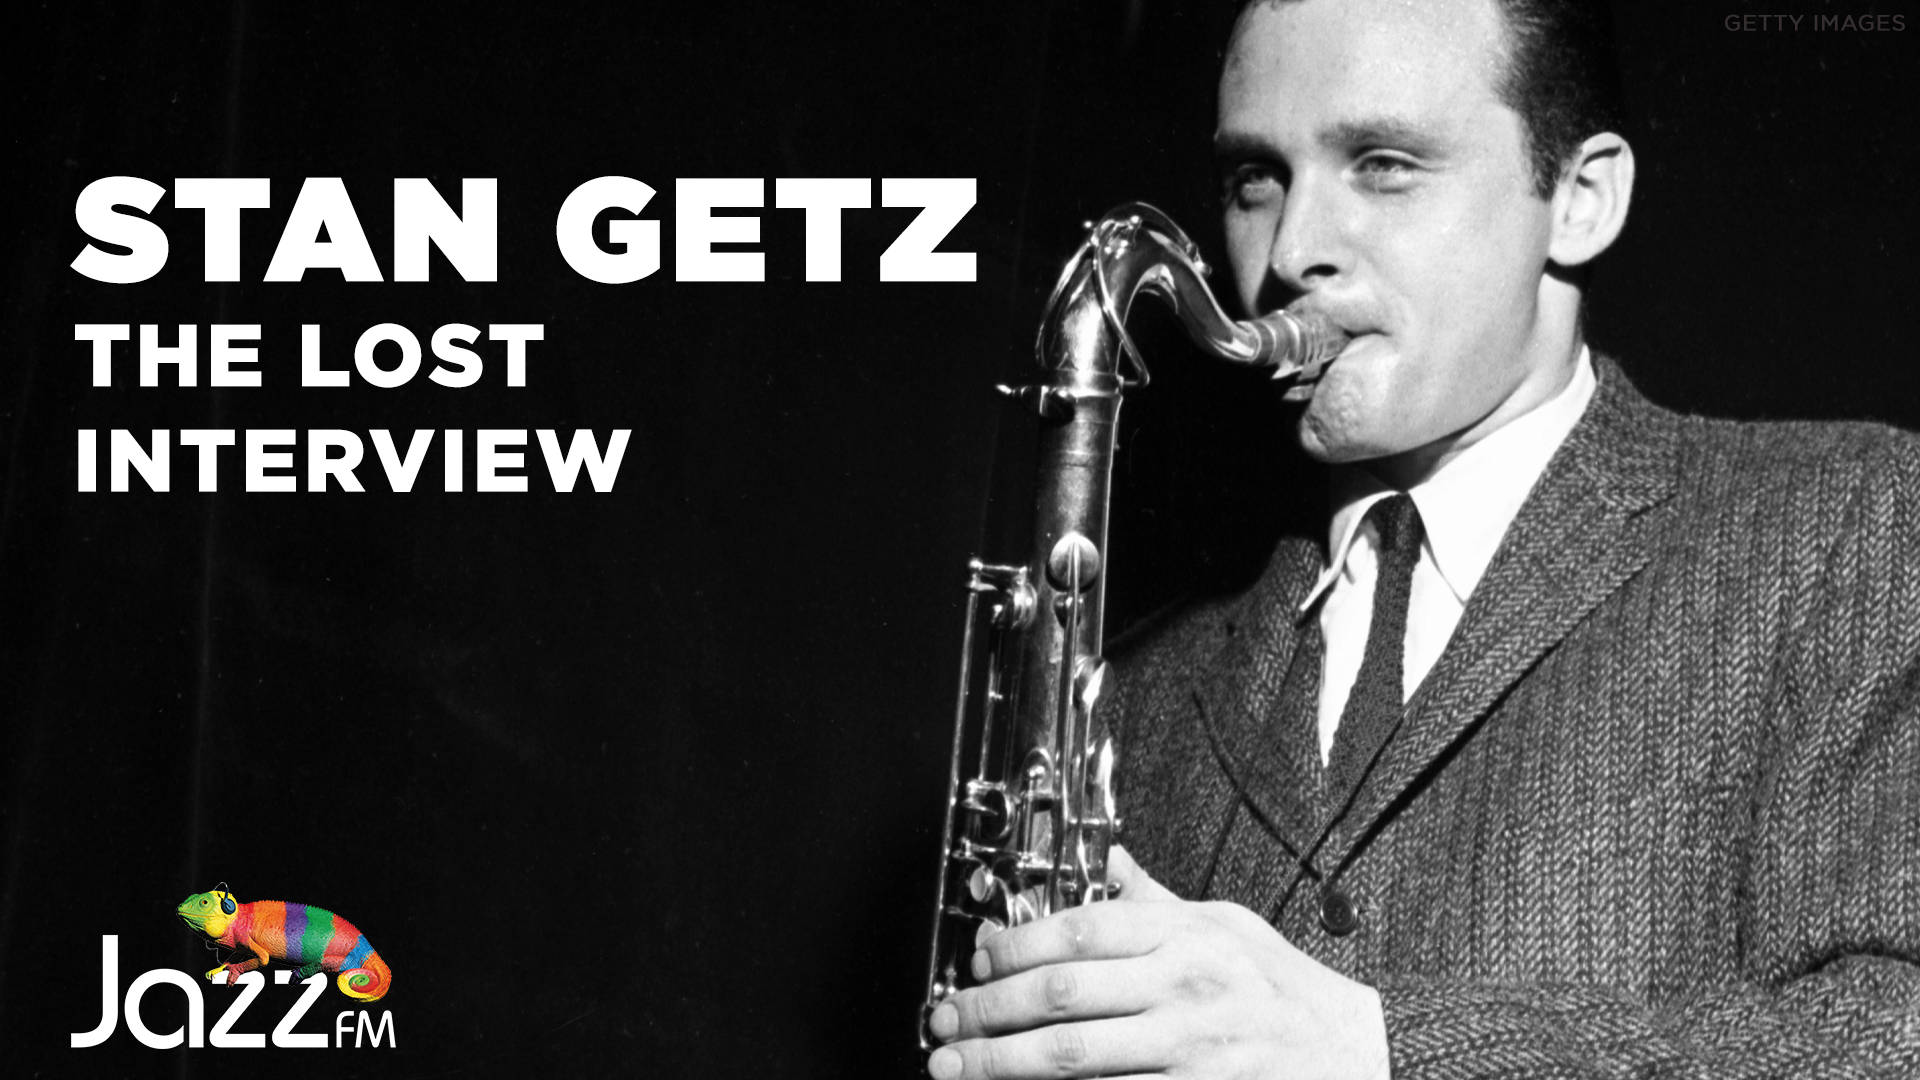 "Stan Getz - The Lost Interview Poster" Wallpaper